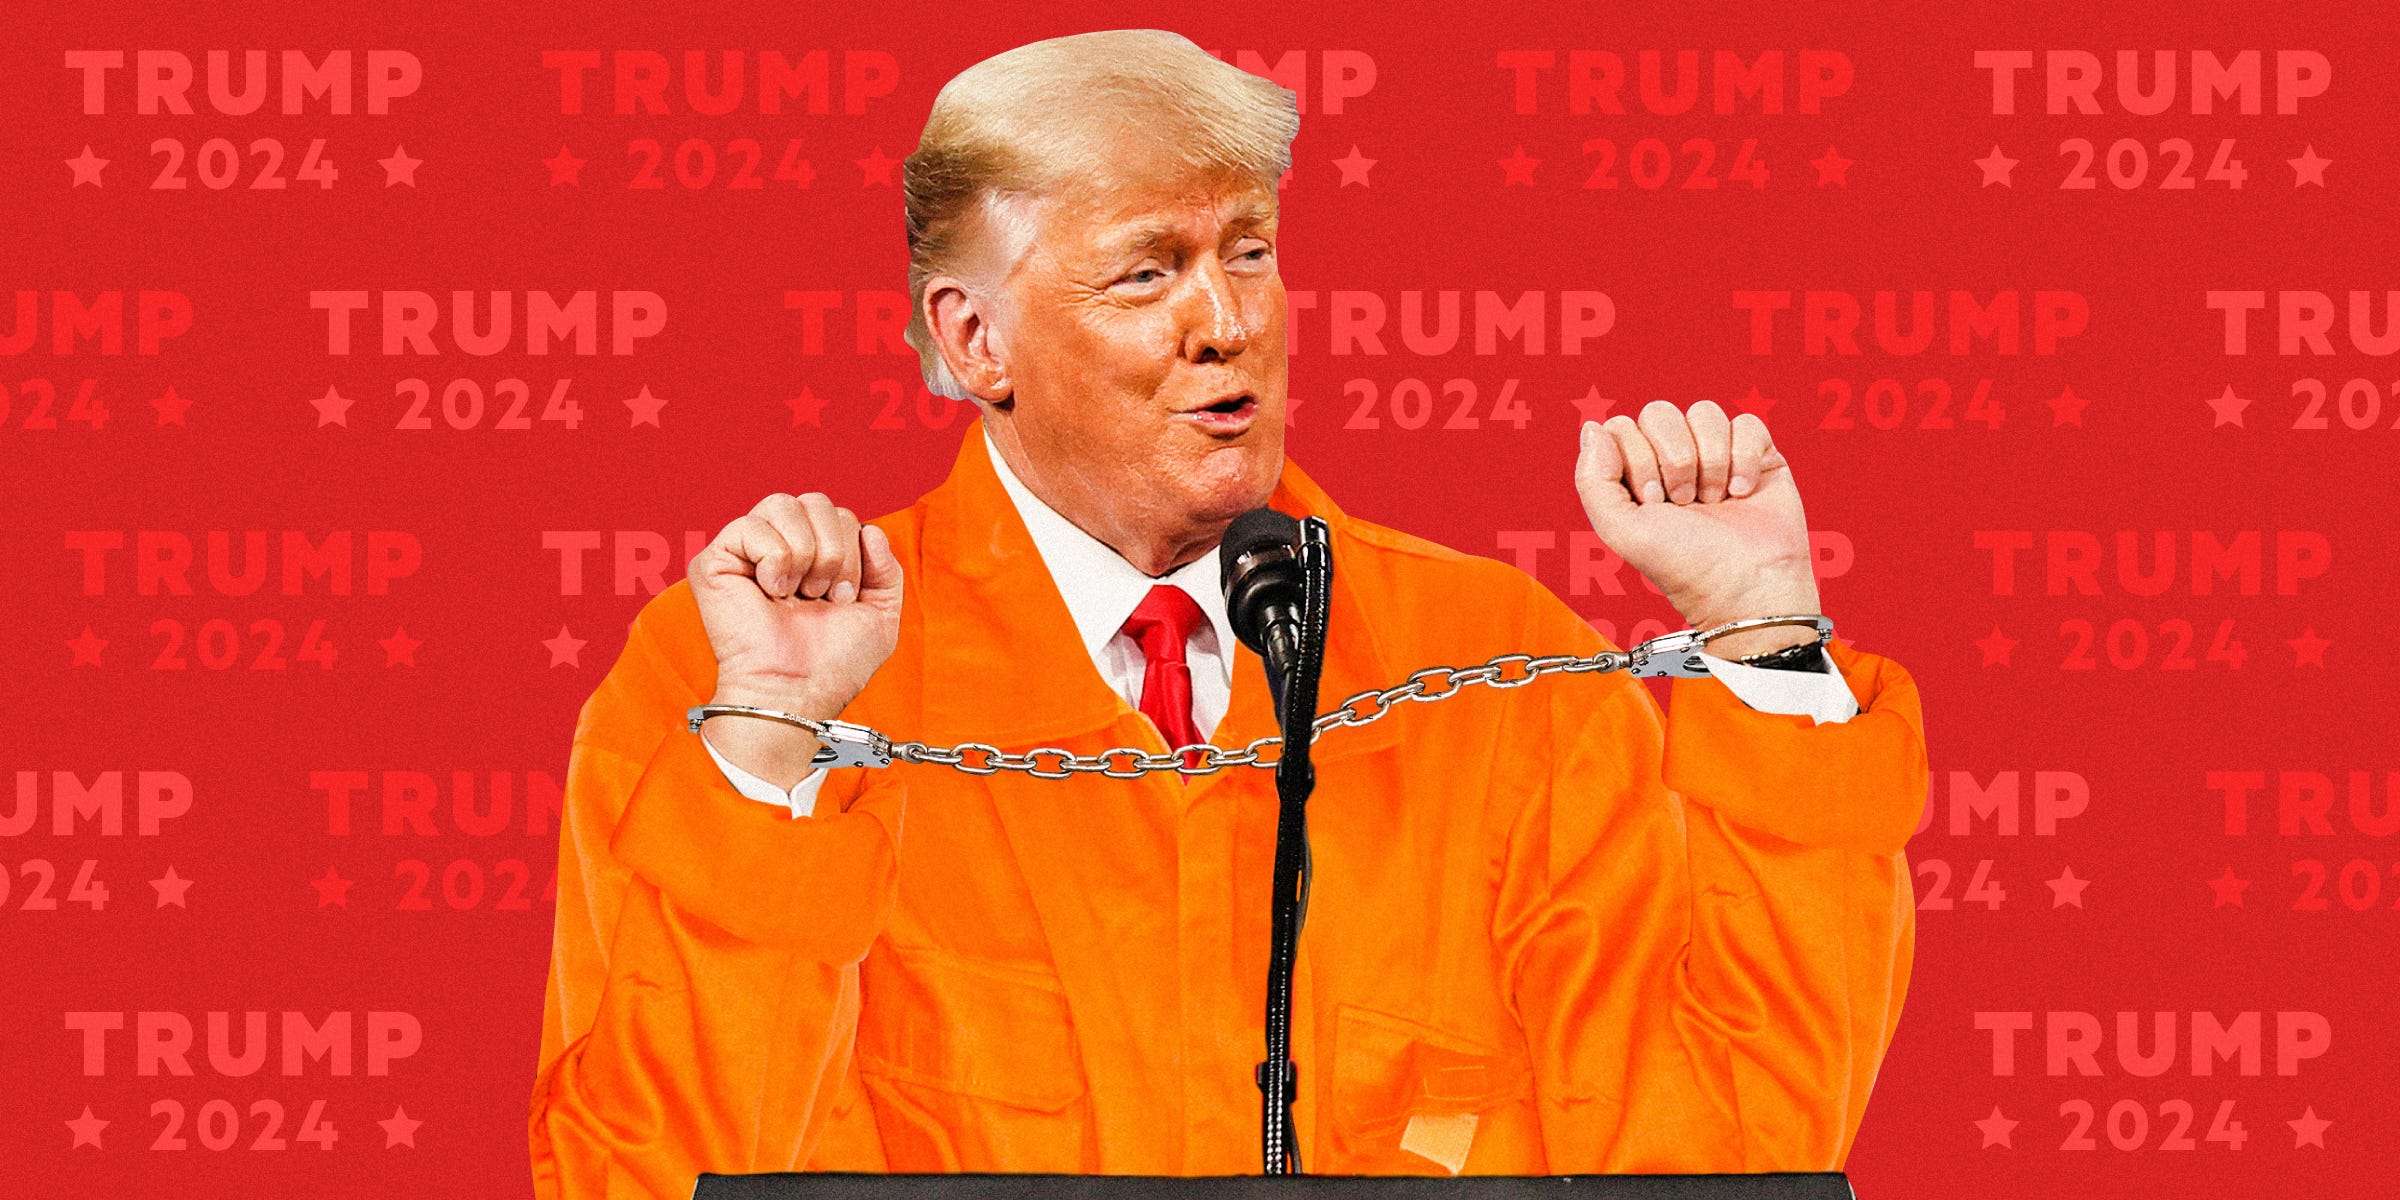 10 Things in Politics Trump 2024 could happen even behind bars